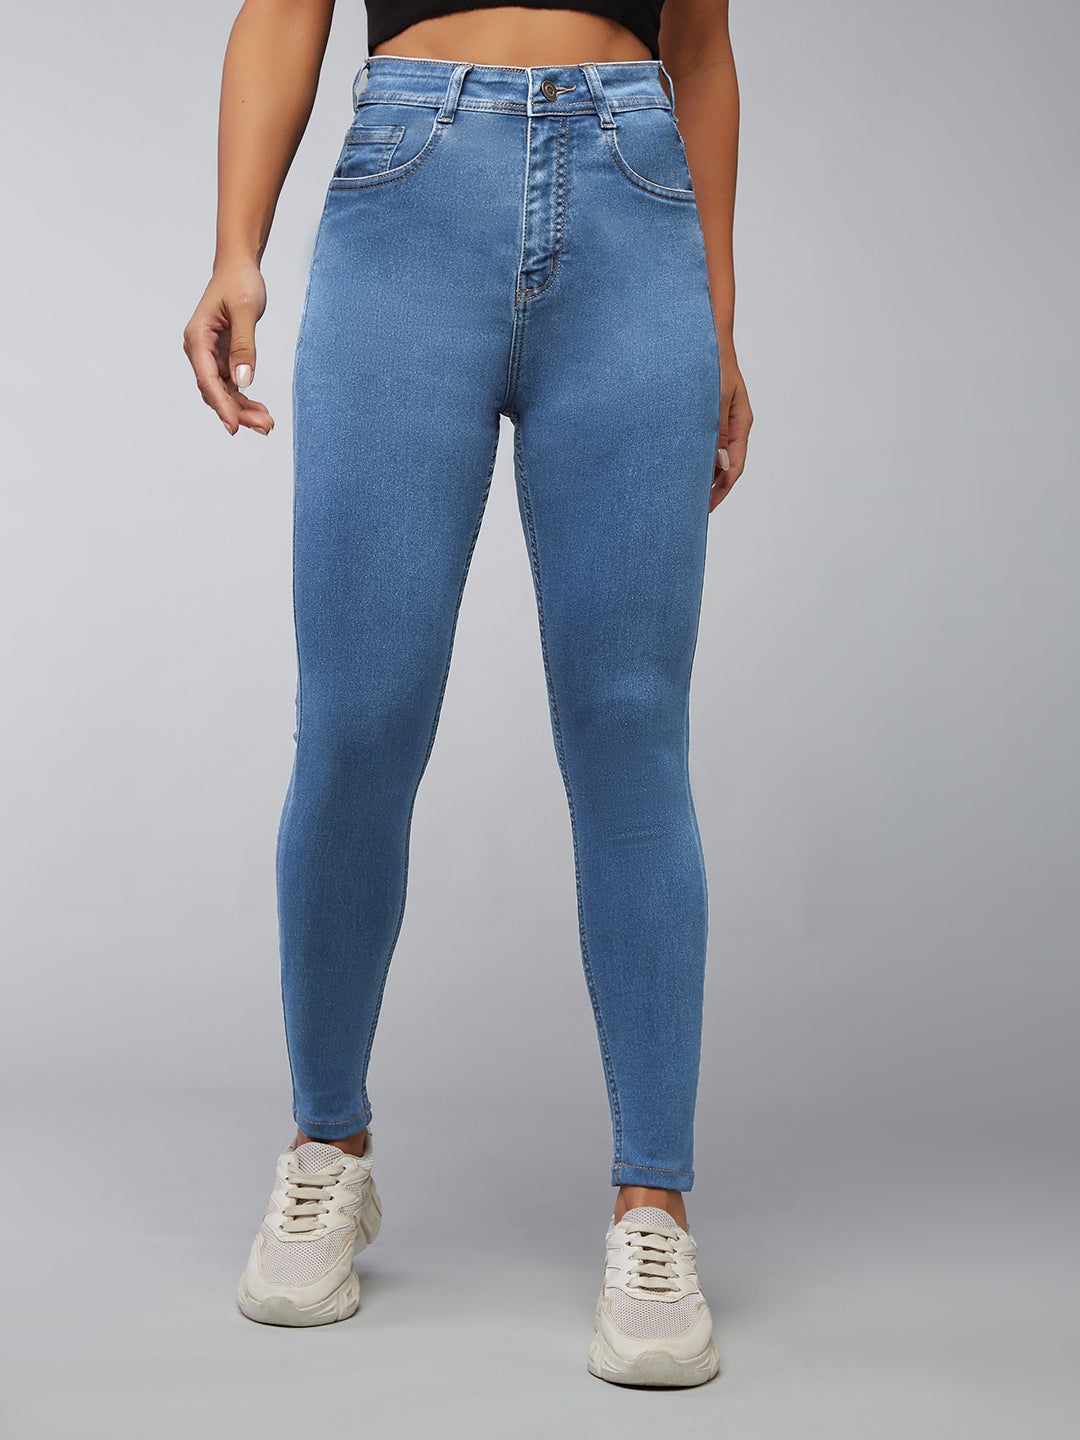 Women's Blue Skinny High-Rise Distressed Cropped Denim Jeans